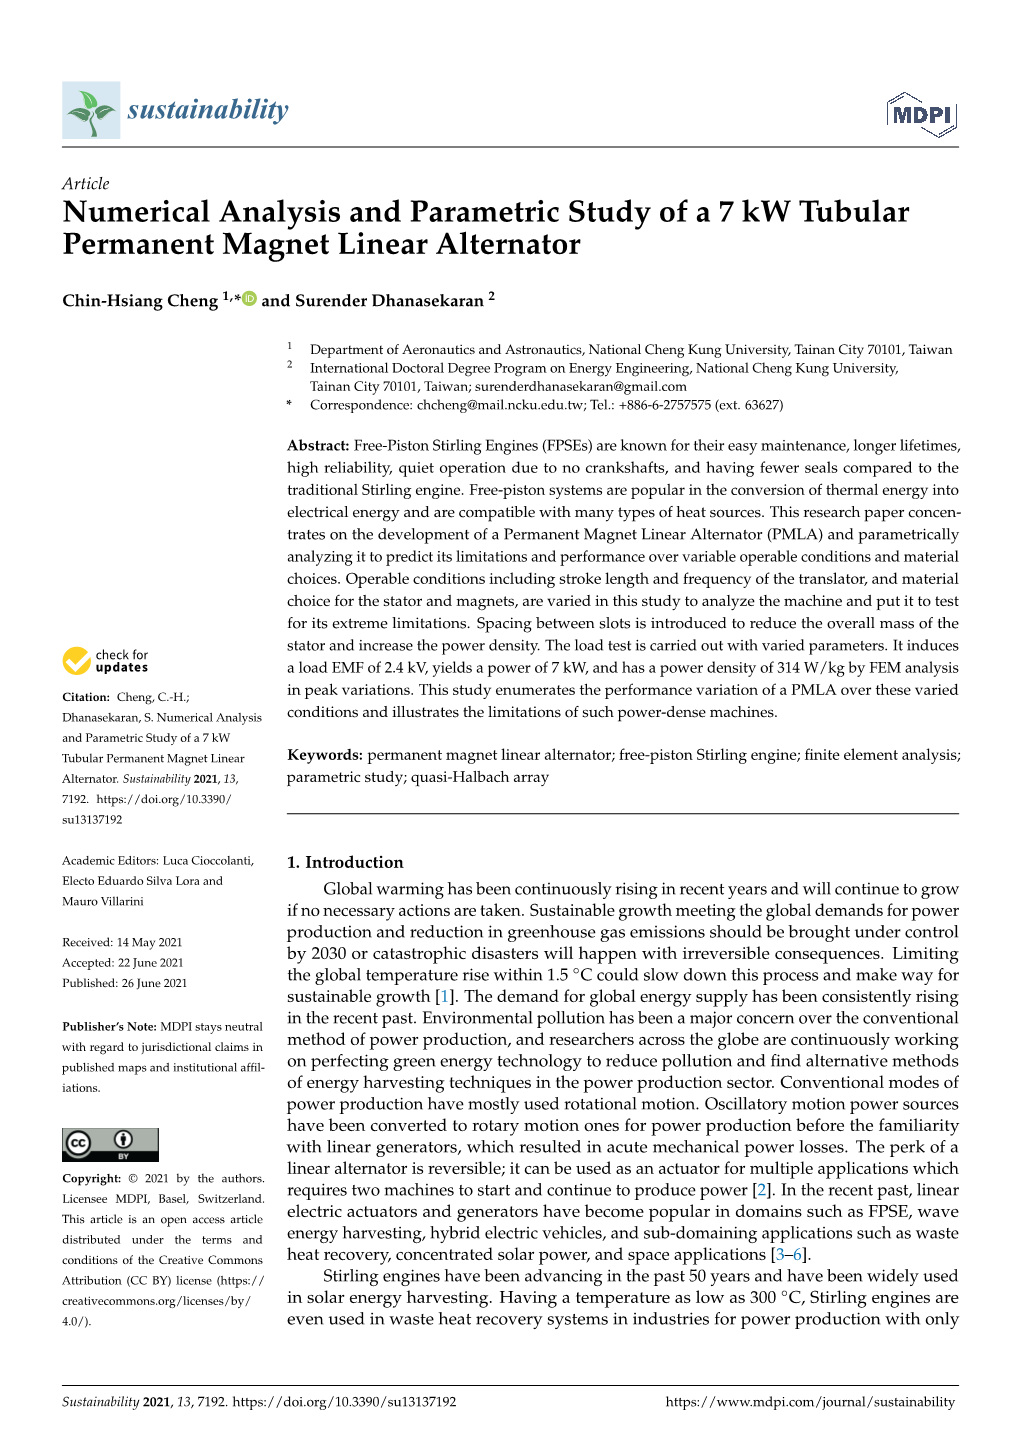 Numerical Analysis and Parametric Study of a 7 Kw Tubular Permanent Magnet Linear Alternator